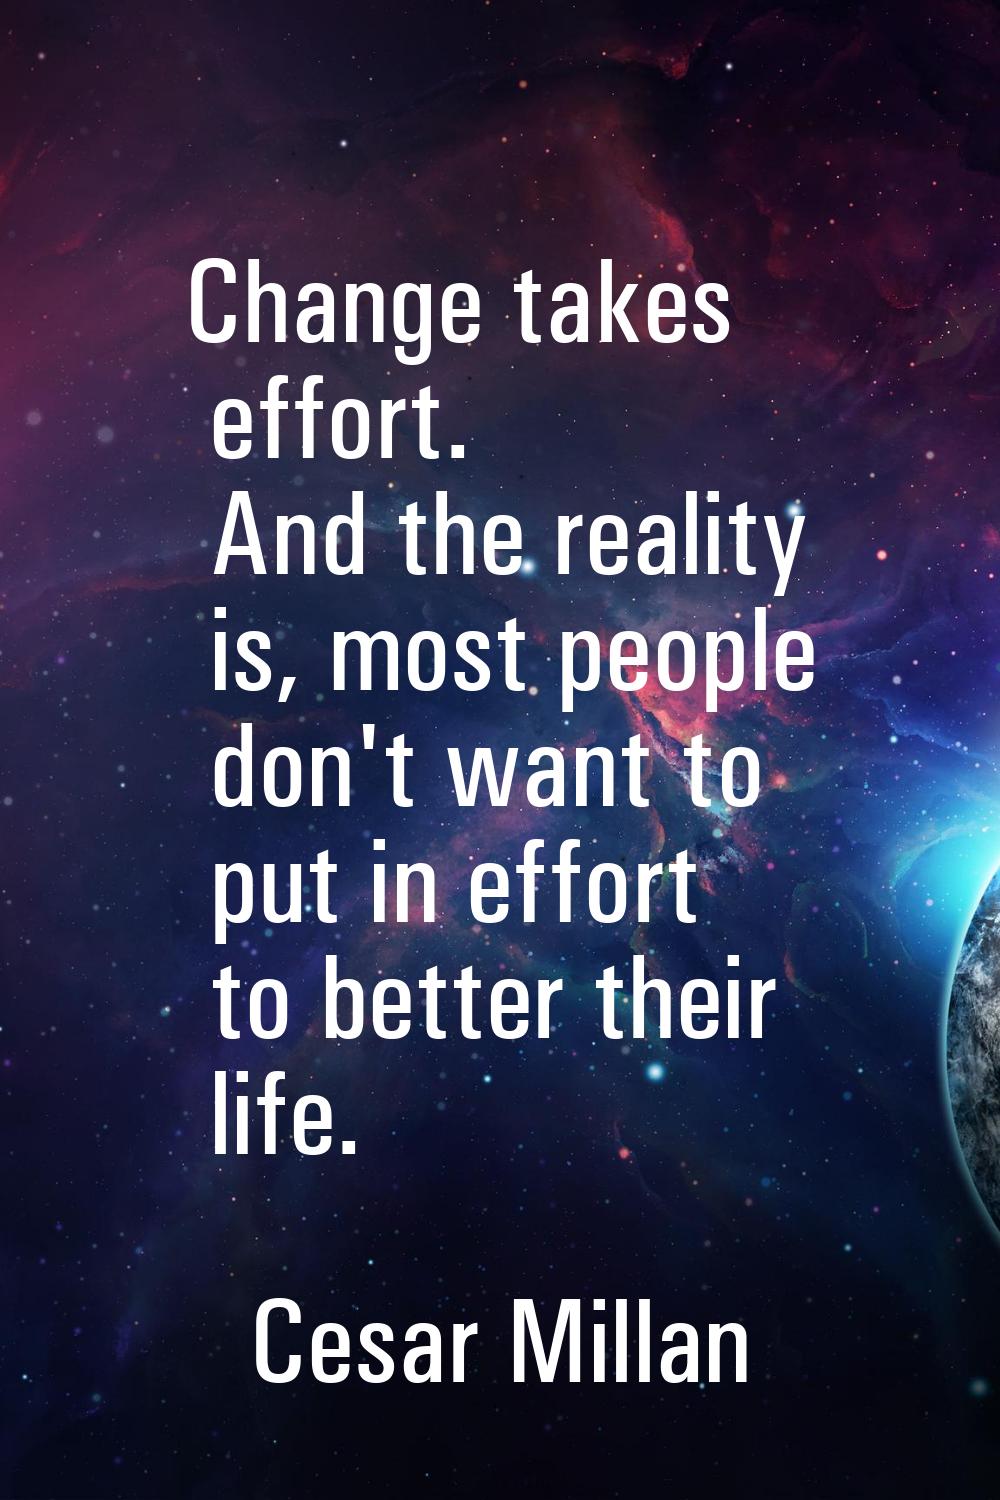 Change takes effort. And the reality is, most people don't want to put in effort to better their li